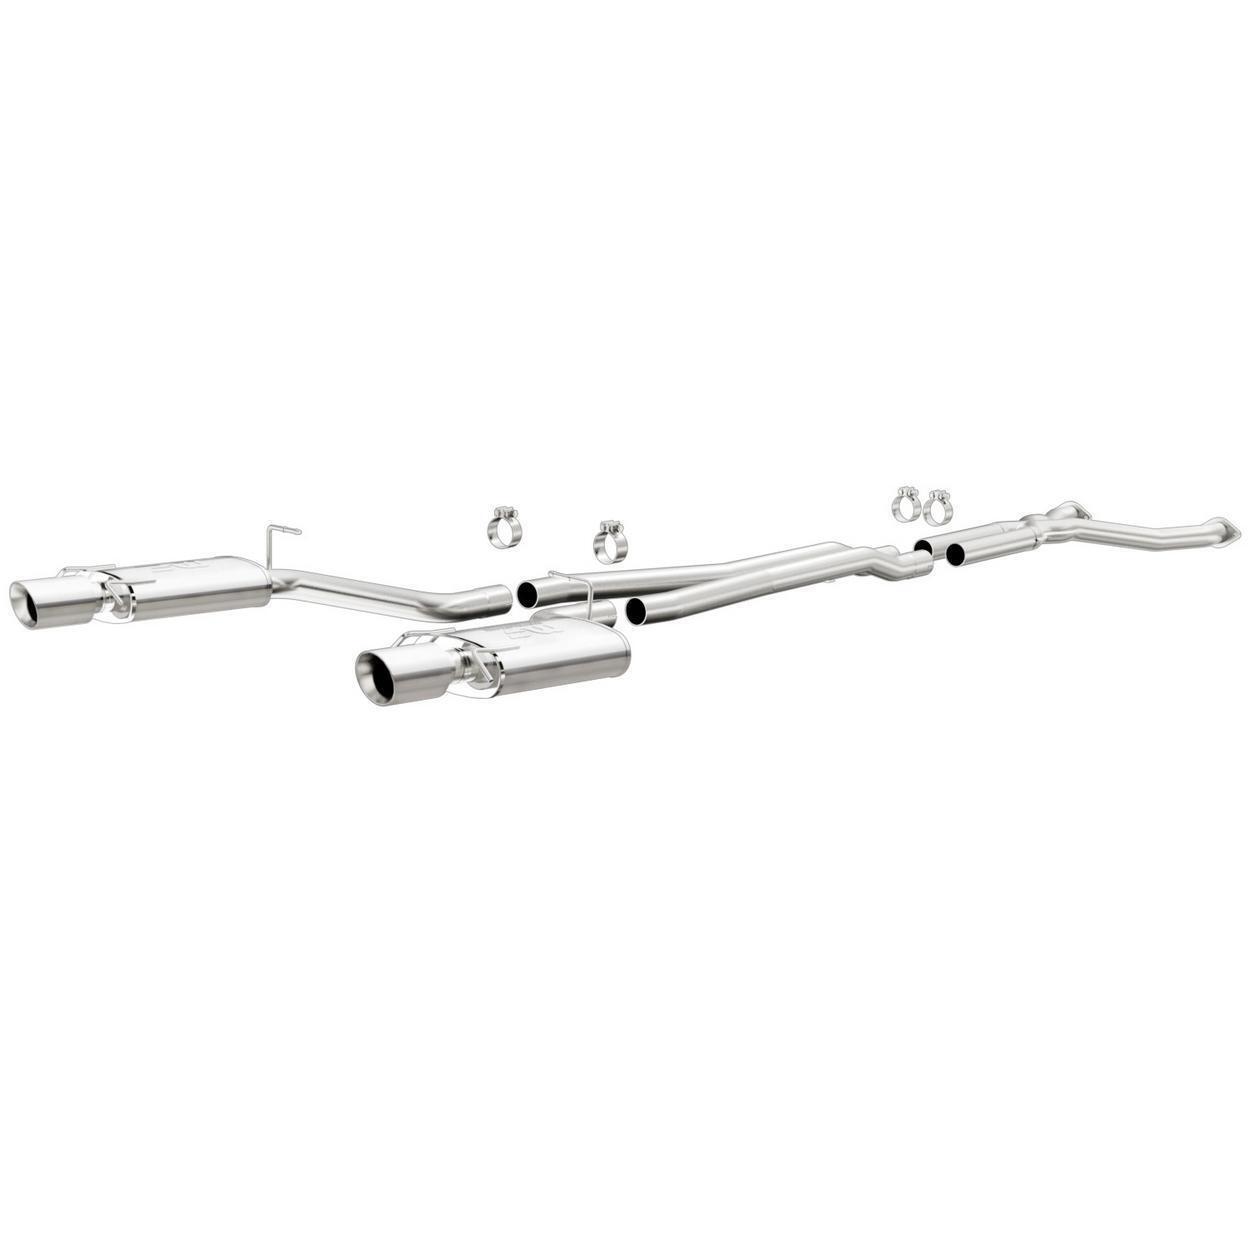 Exhaust System Kit for 2004-2005 Cadillac CTS V 5.7L V8 GAS OHV